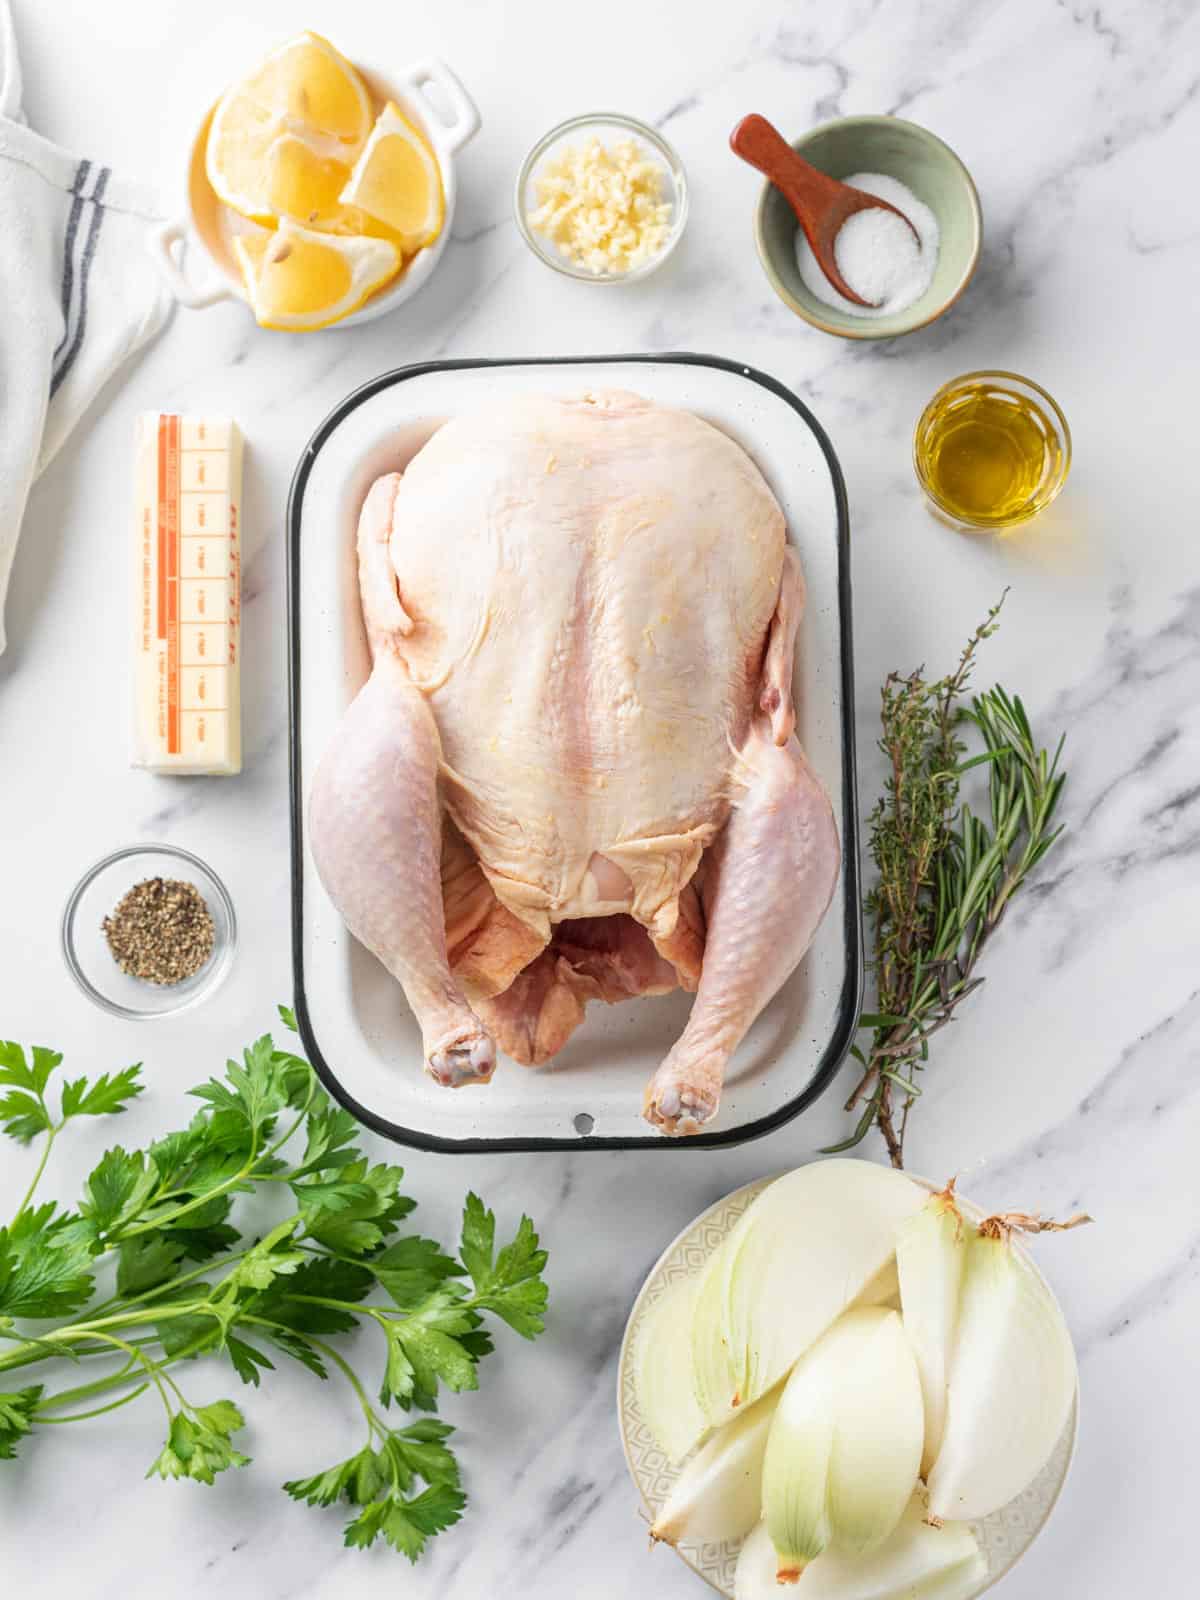 Ingredients needed to make a whole roast chicken.